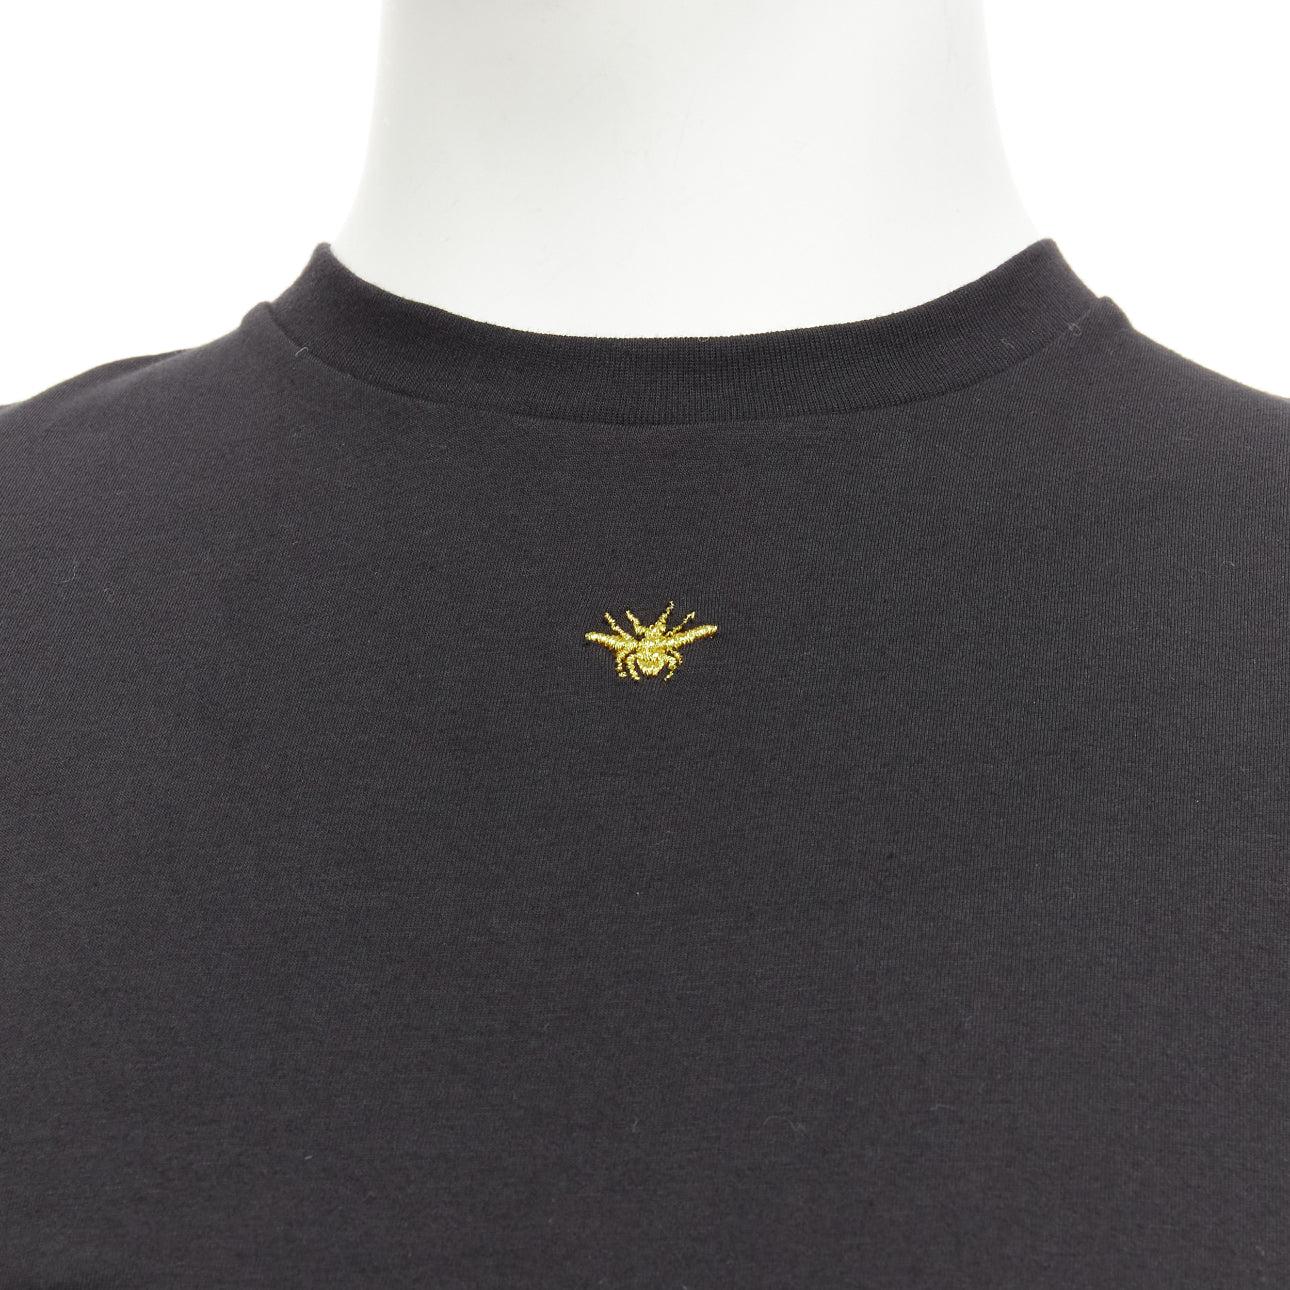 DIOR HOMME black cotton gold bee embroidered fitted tshirt XXS
Reference: AAWC/A00772
Brand: Dior
Collection: HOMME
Material: Cotton
Color: Black, Gold
Pattern: Animal Print
Closure: Slip On
Extra Details: Back darts at lower shoulder.
Made in: